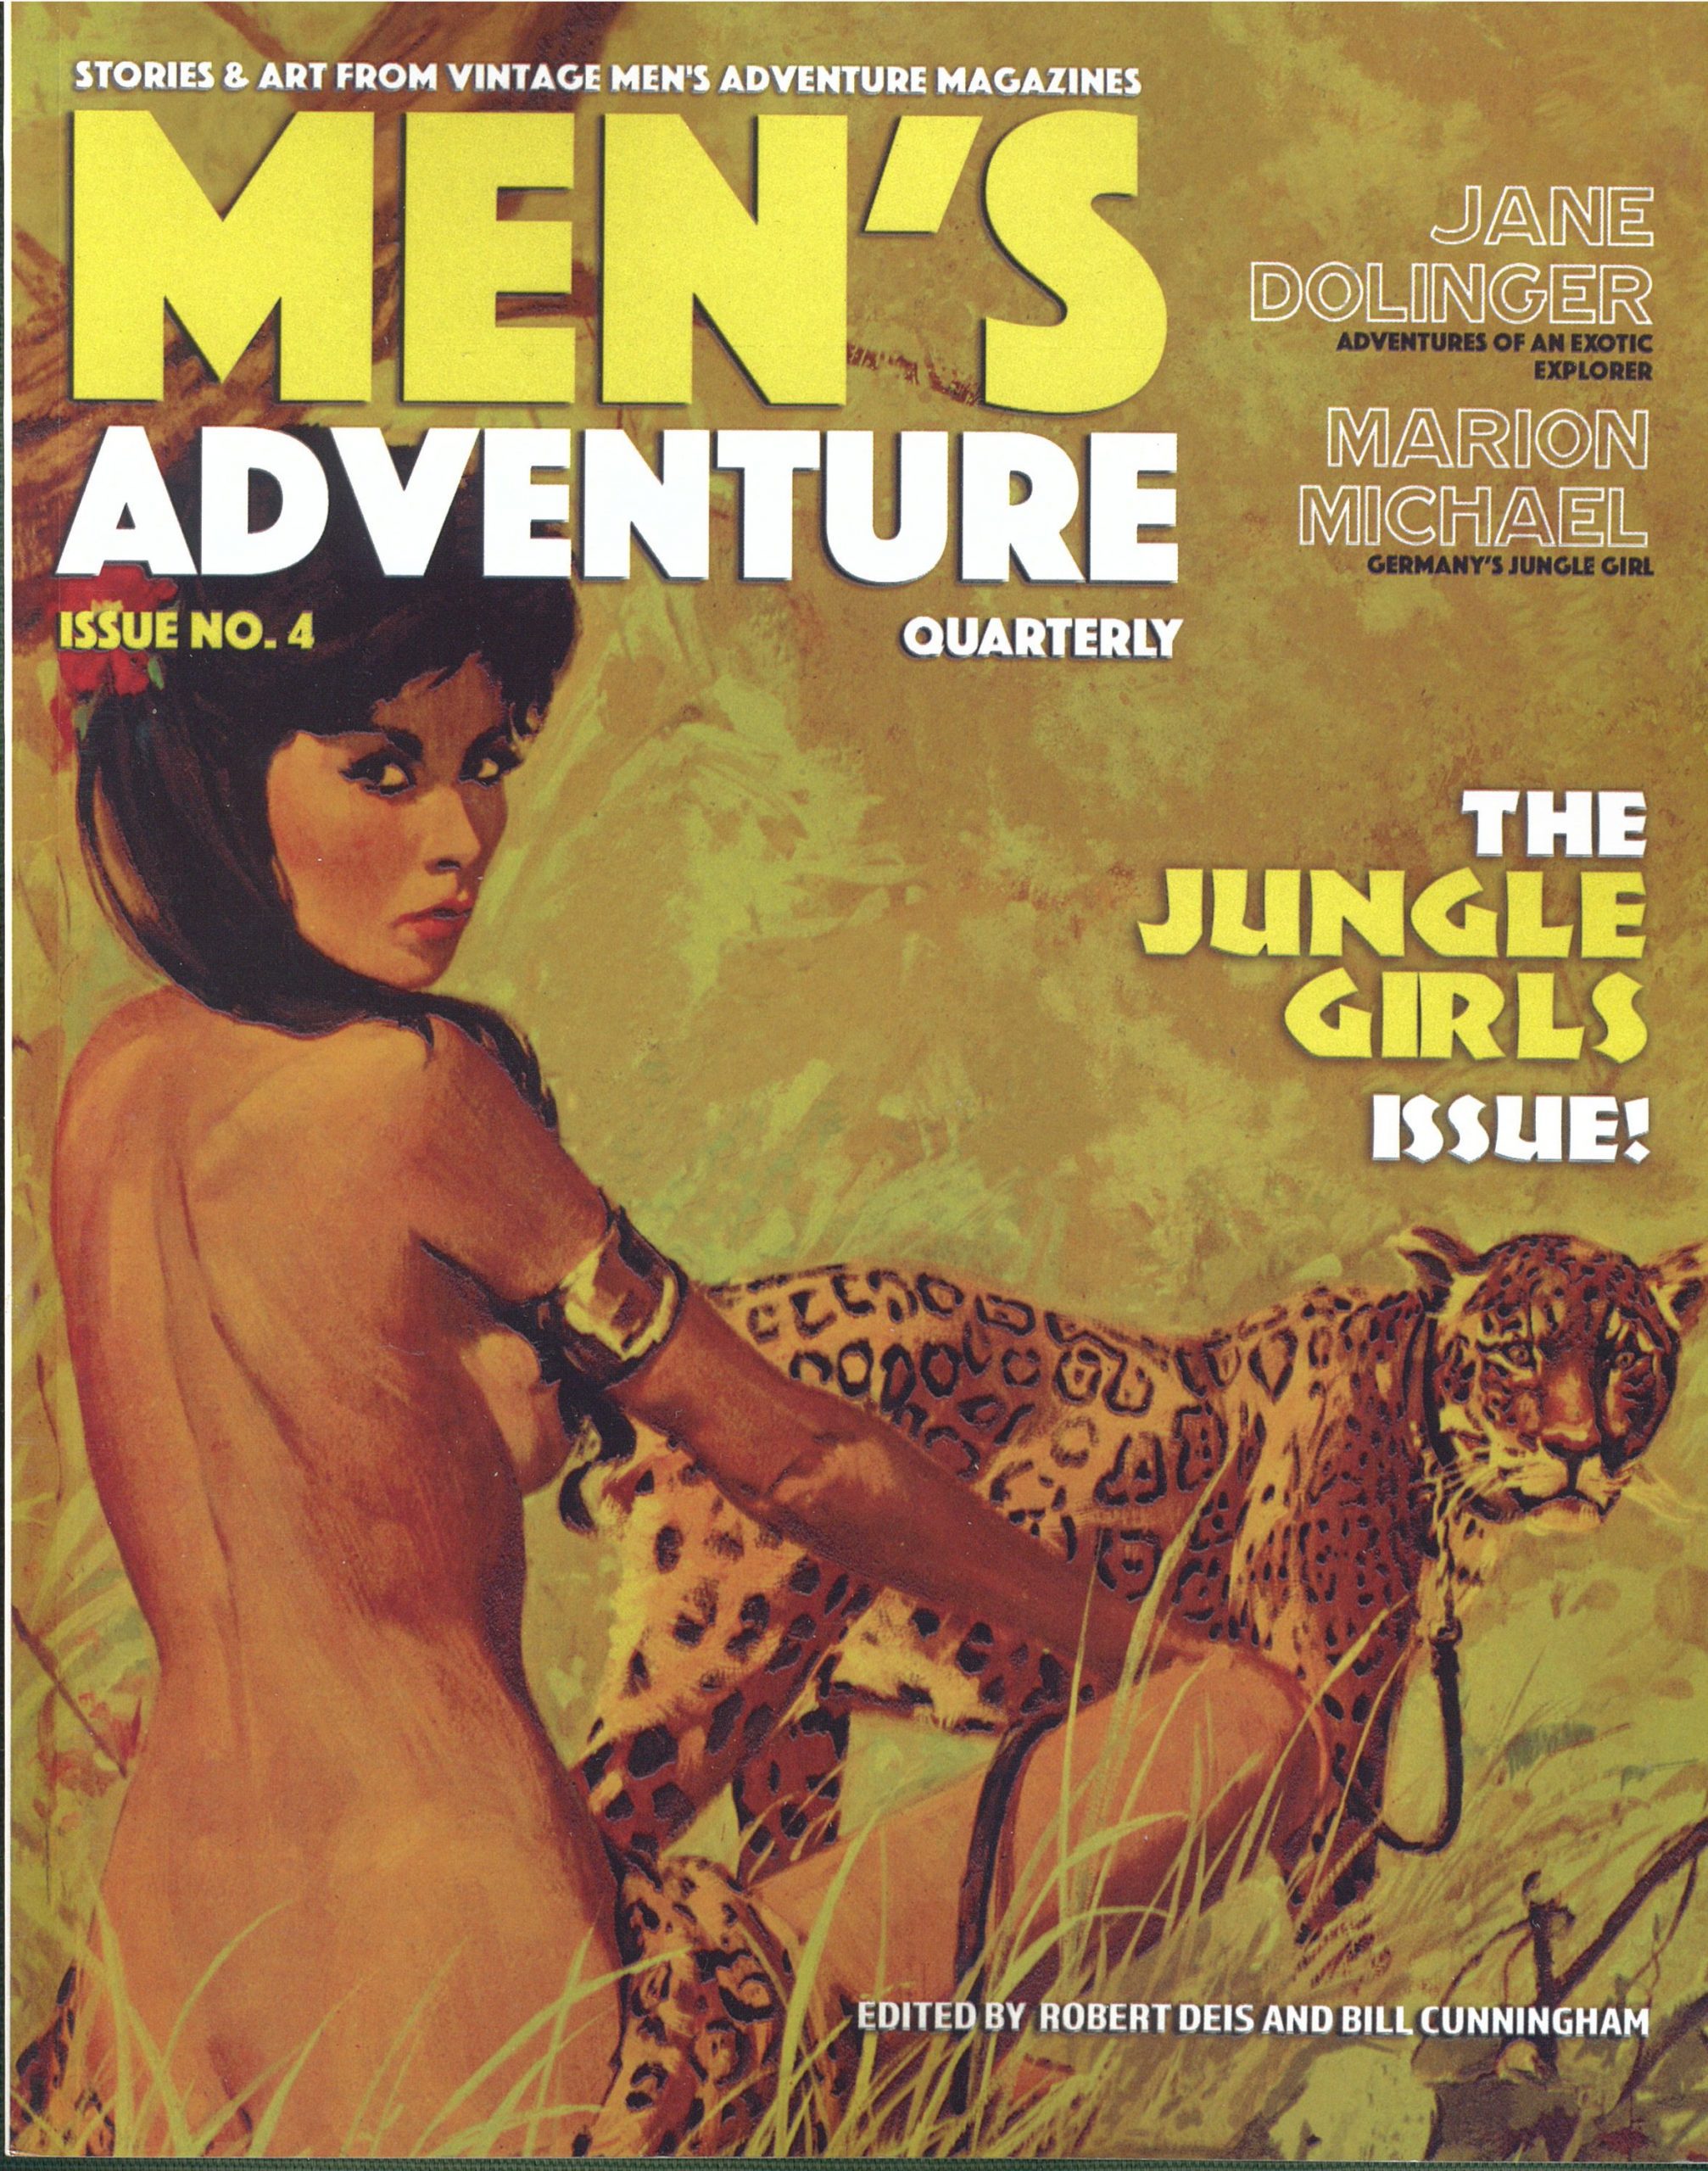 Men's Adventure Vol 4 Book Review By Ron Fortier